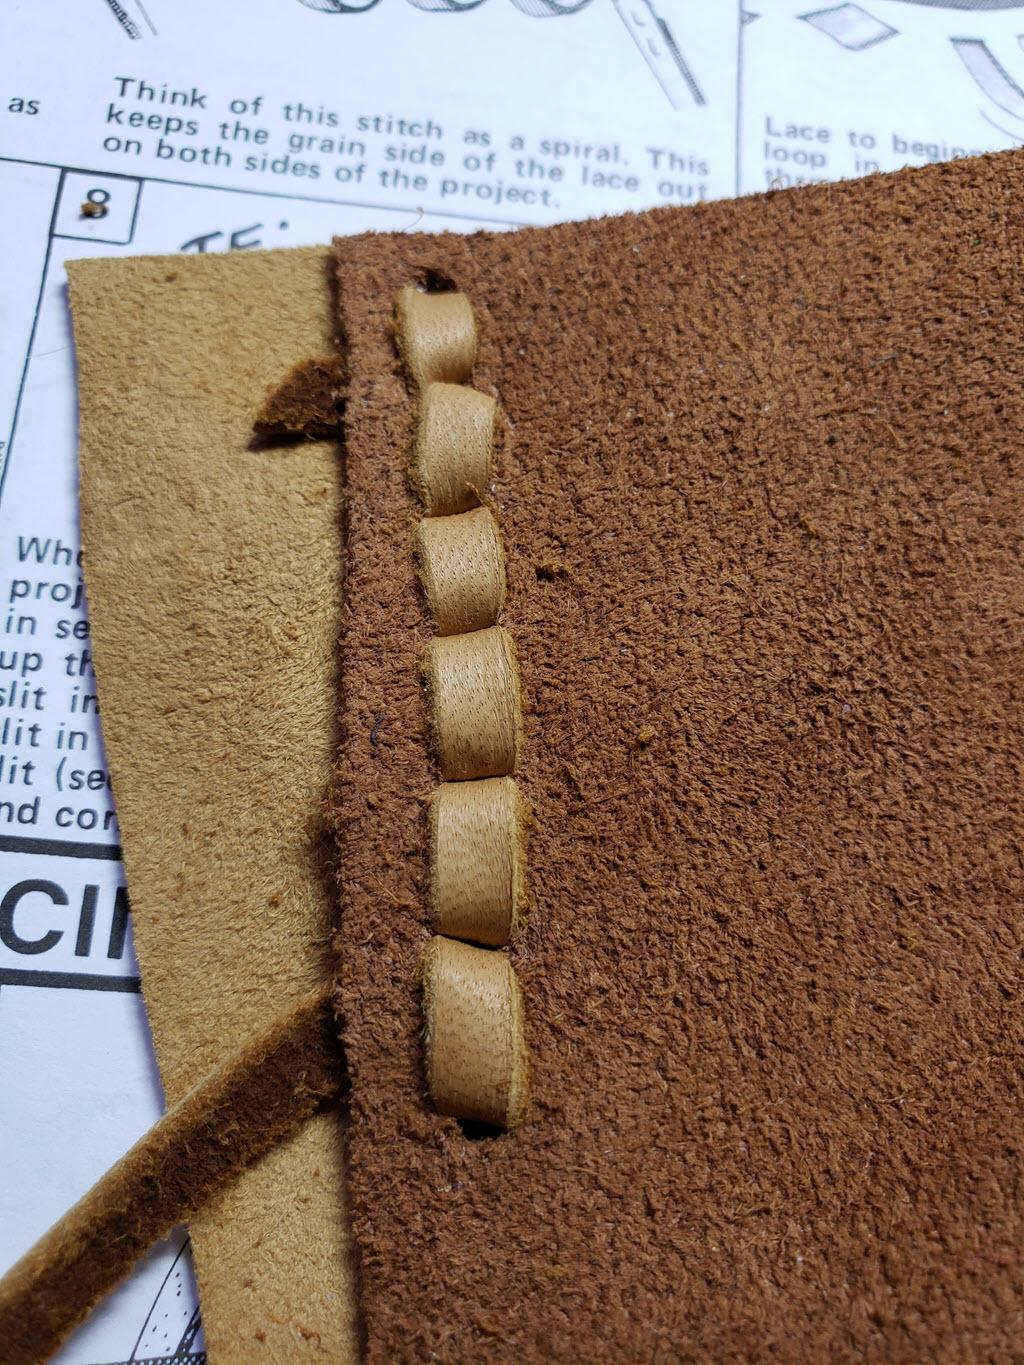 leather lacing techniques - Google Search  Leather and lace, Sewing  leather, Leather working patterns